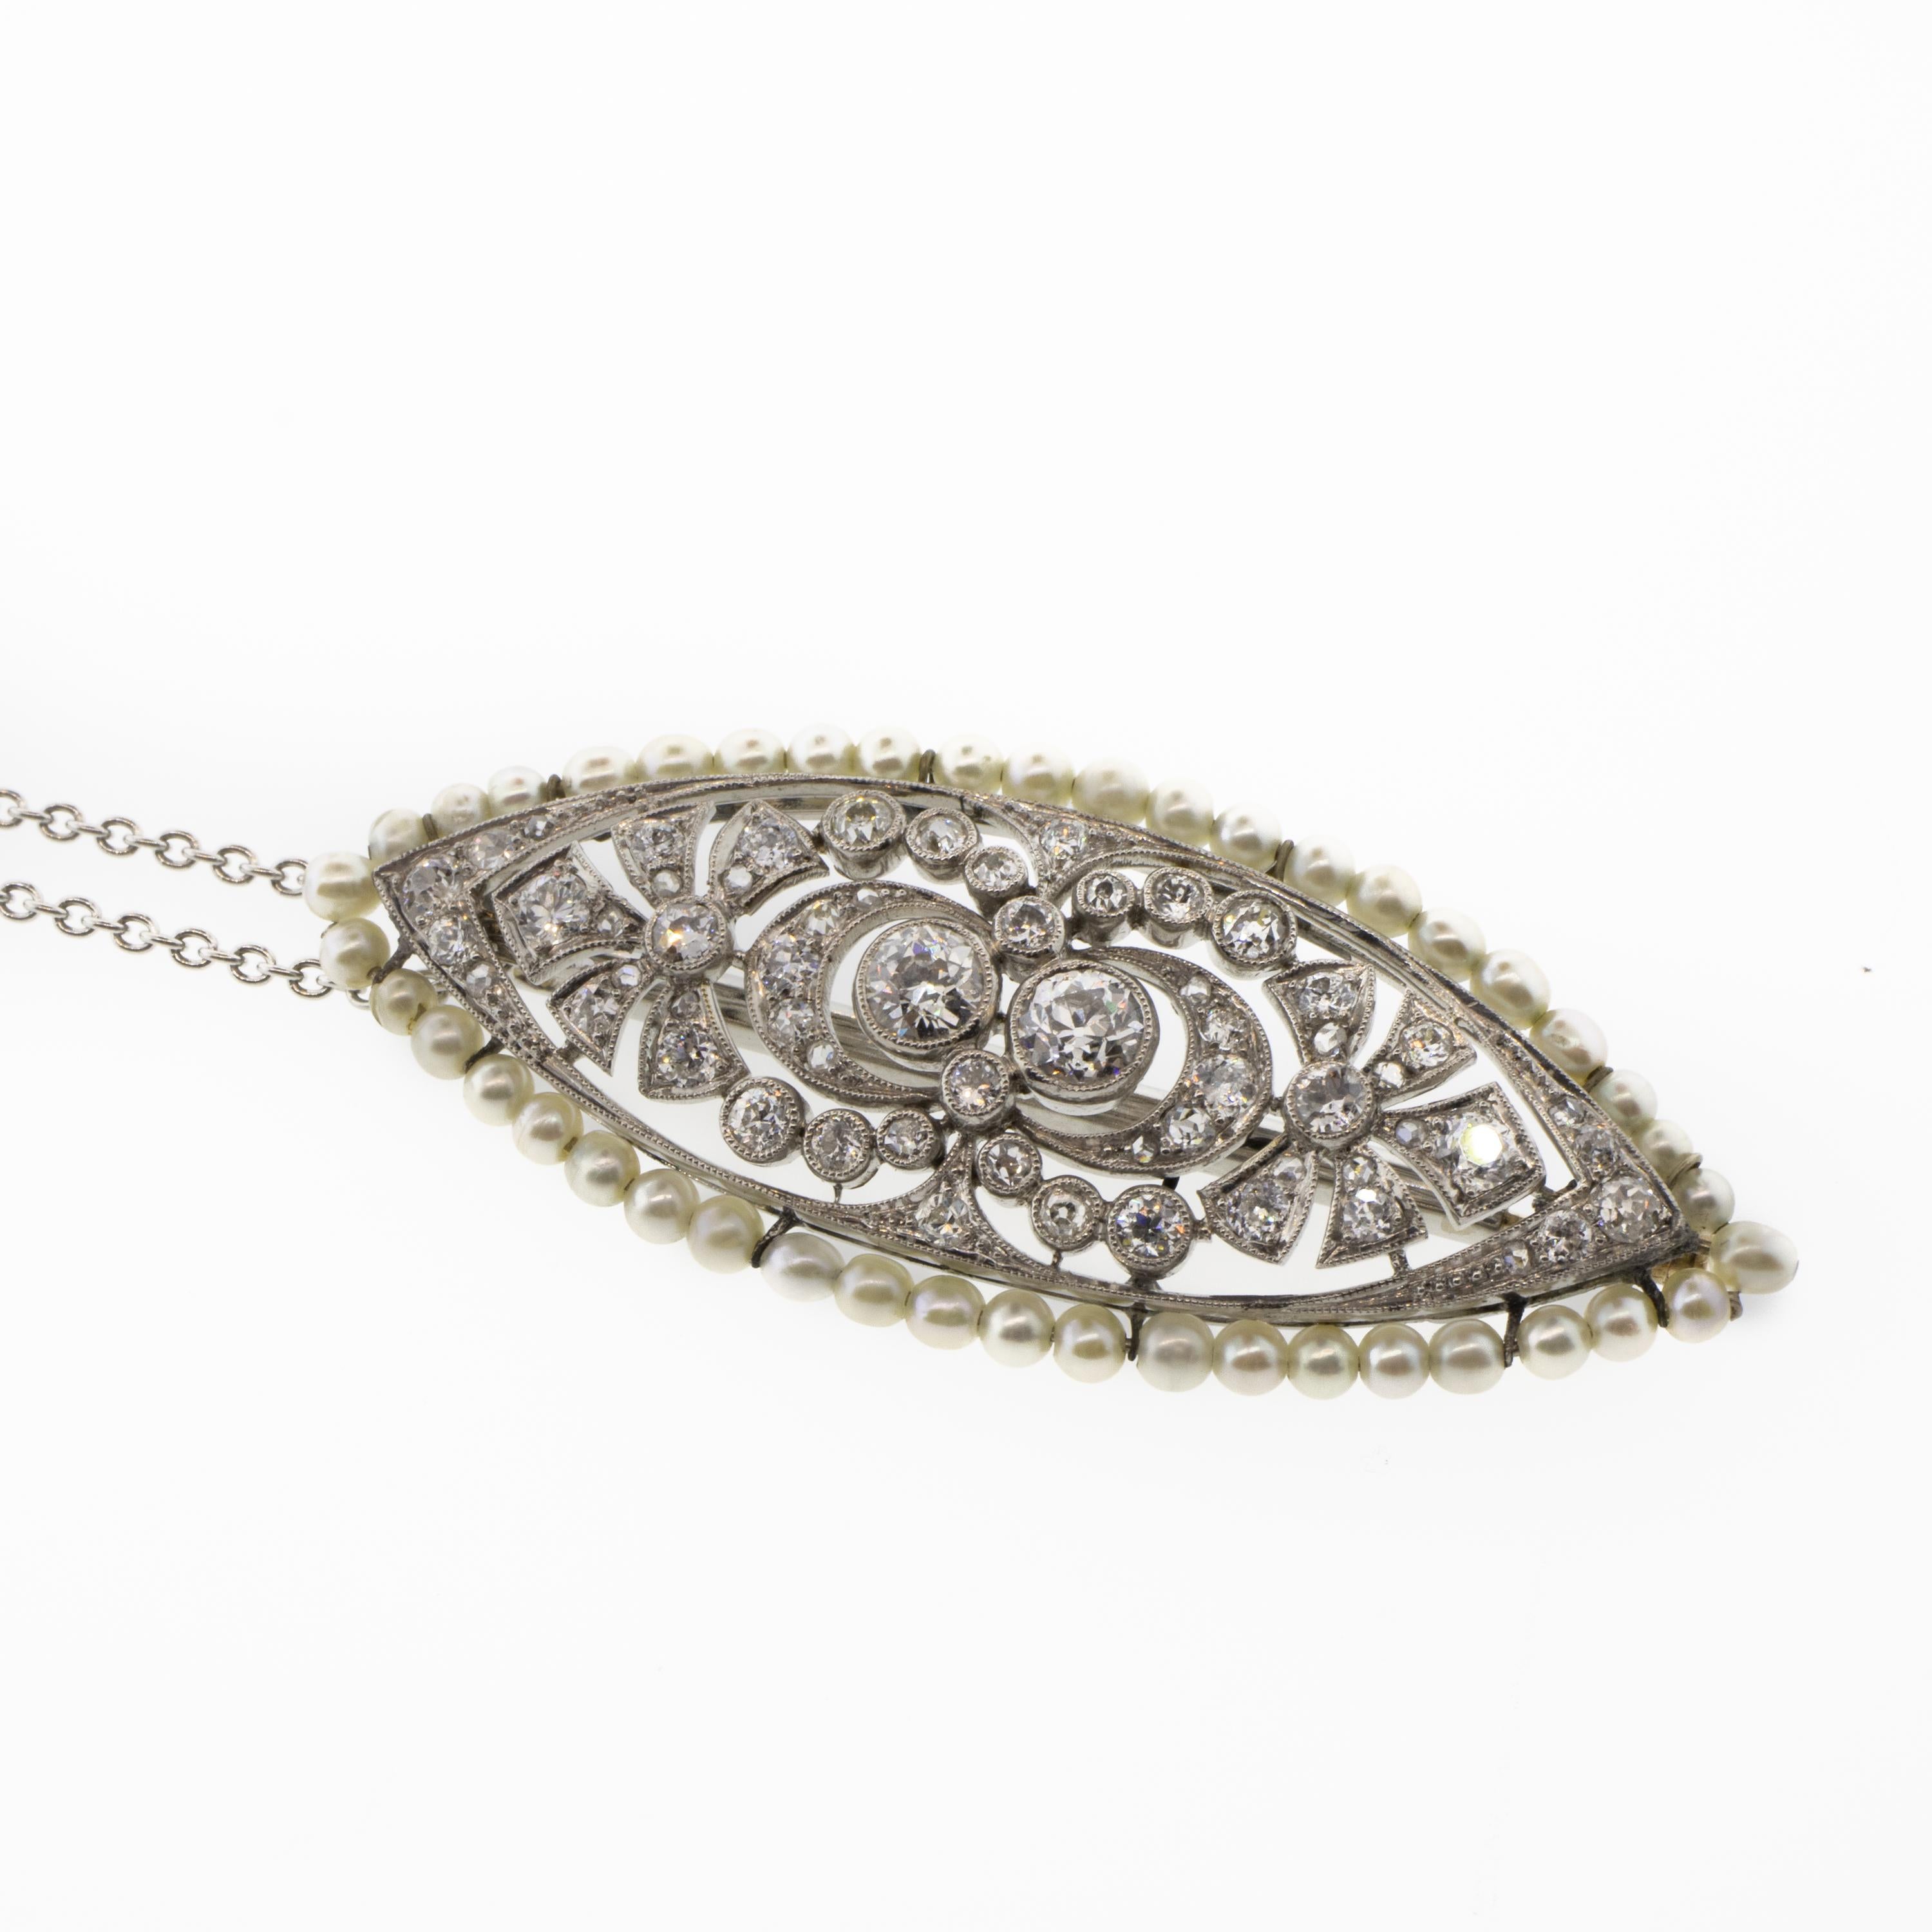 This one is for the true vintage jewelry connoisseur who appreciates the story as much as the piece. This stunning necklace came in as part of a six-piece estate that escaped the Nazi invasion of Vienna, Austria in 1938. We'd be happy to share more